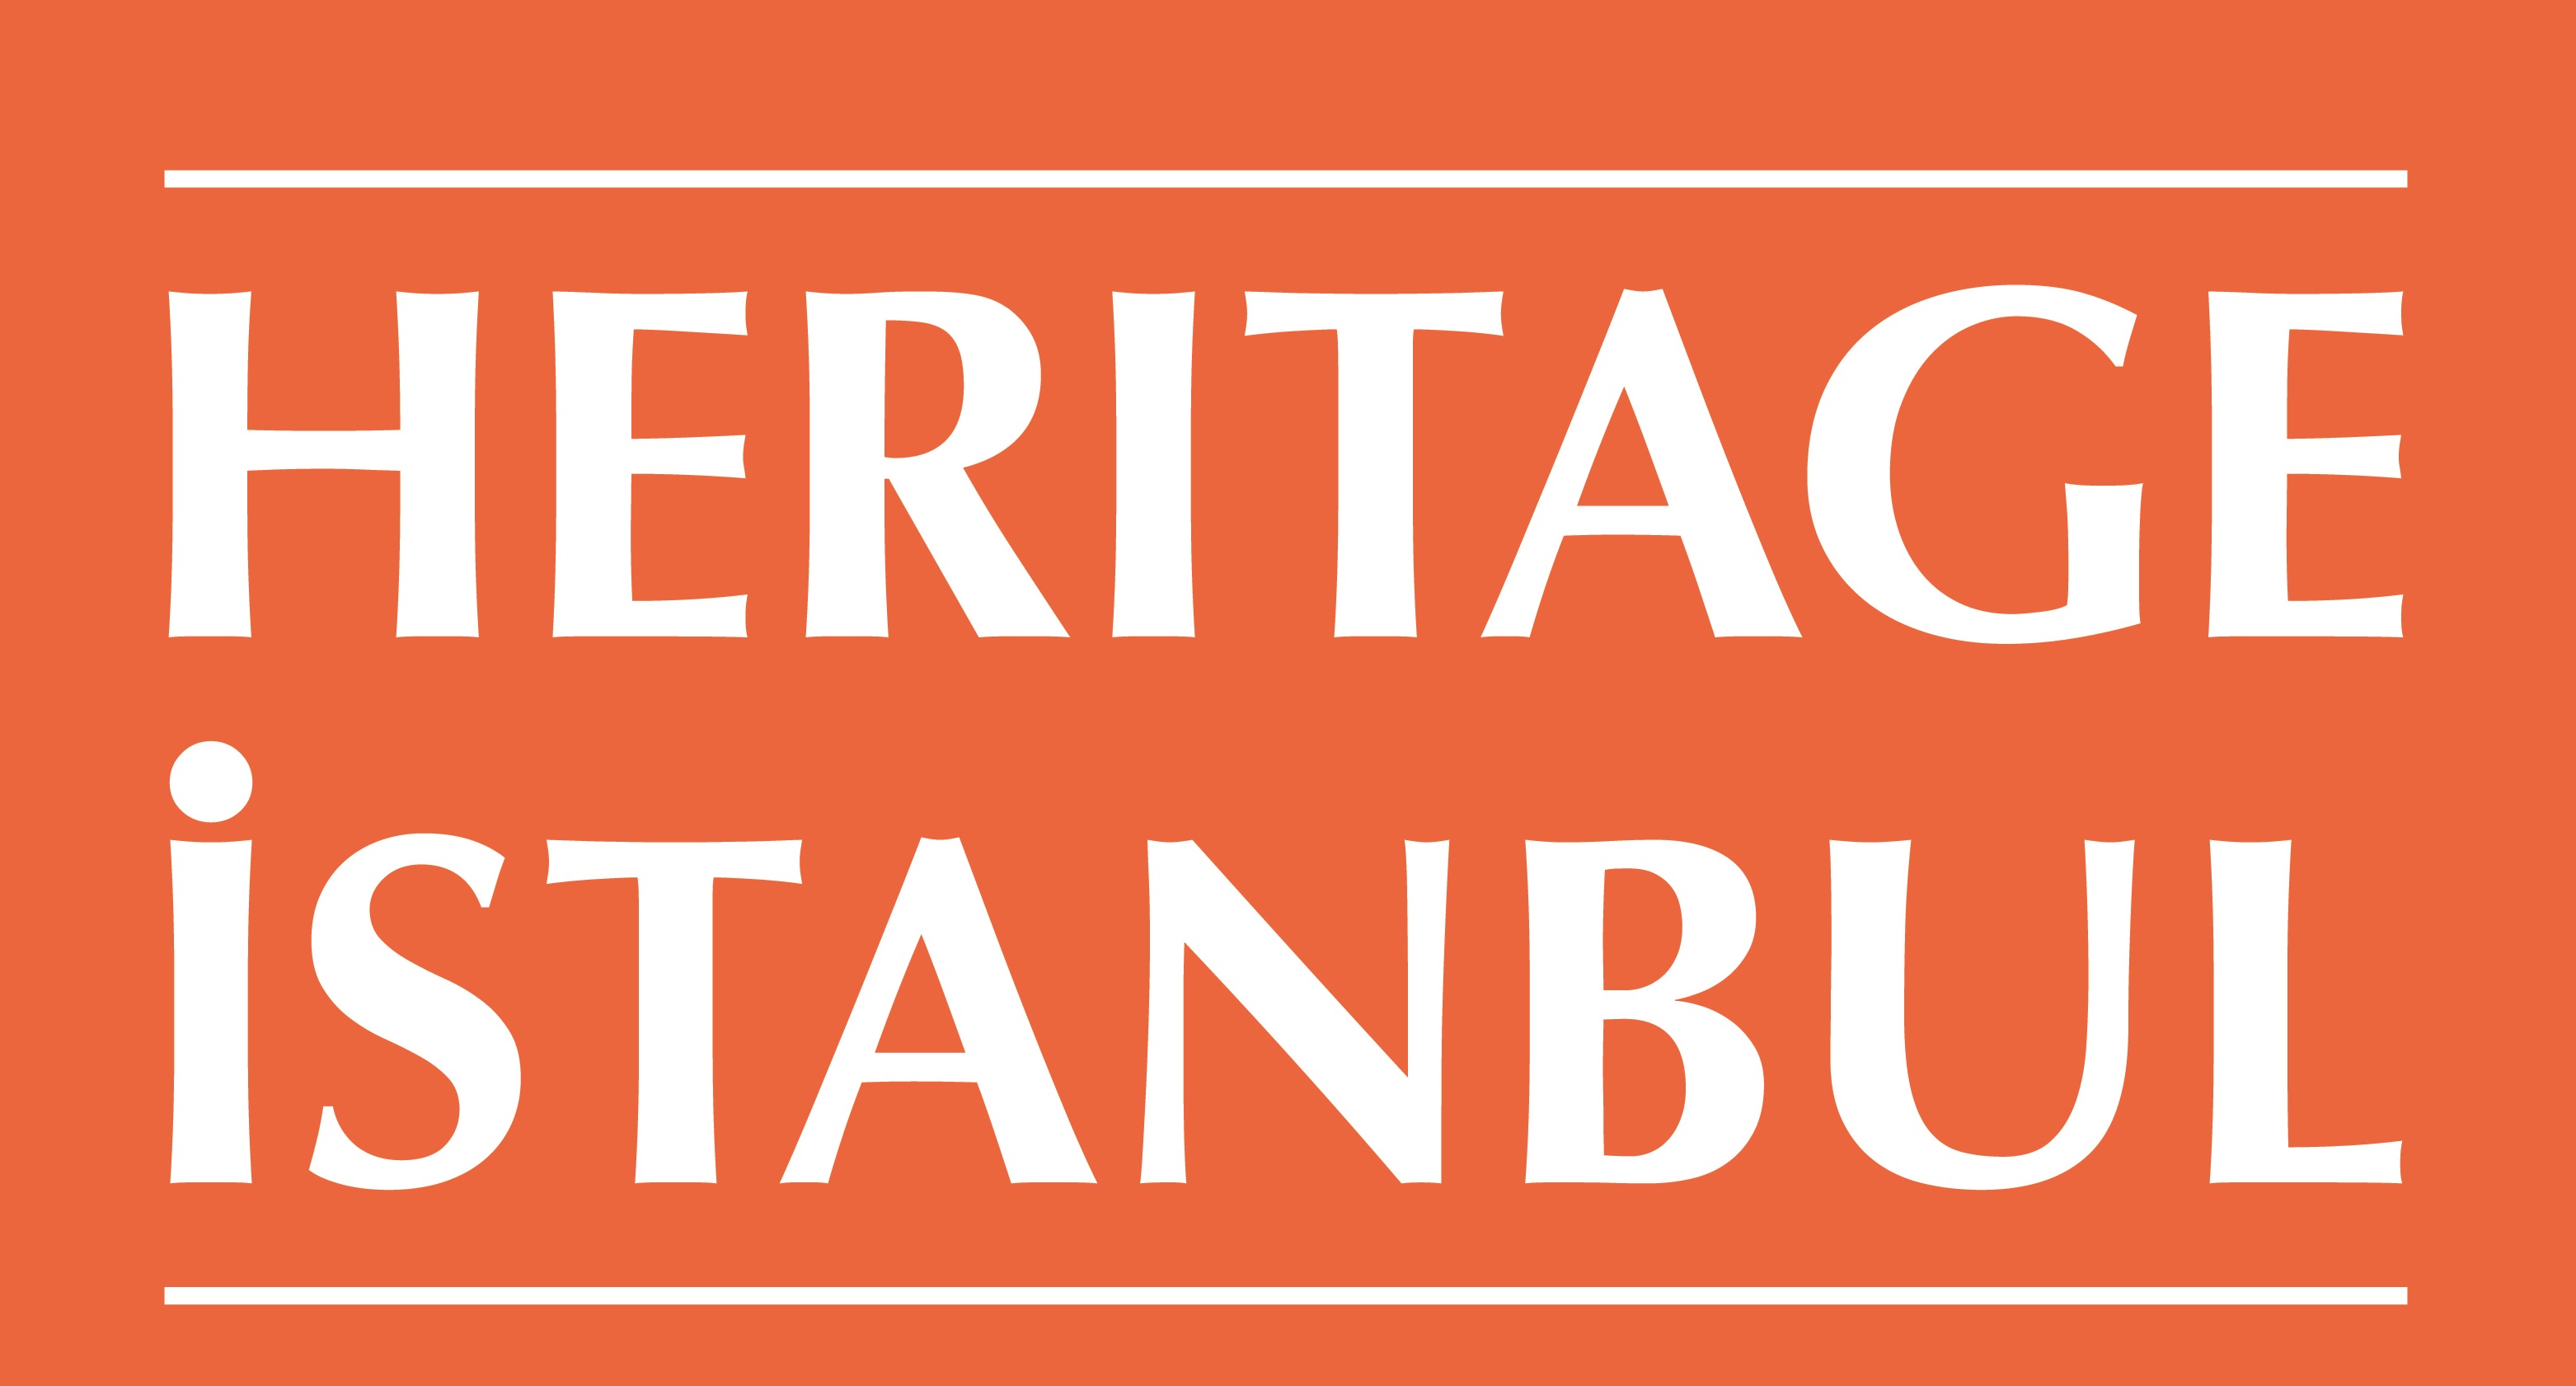 5th Heritage Istanbul 2021, Restoration, Archaeology and Museum Technologies Exhibition